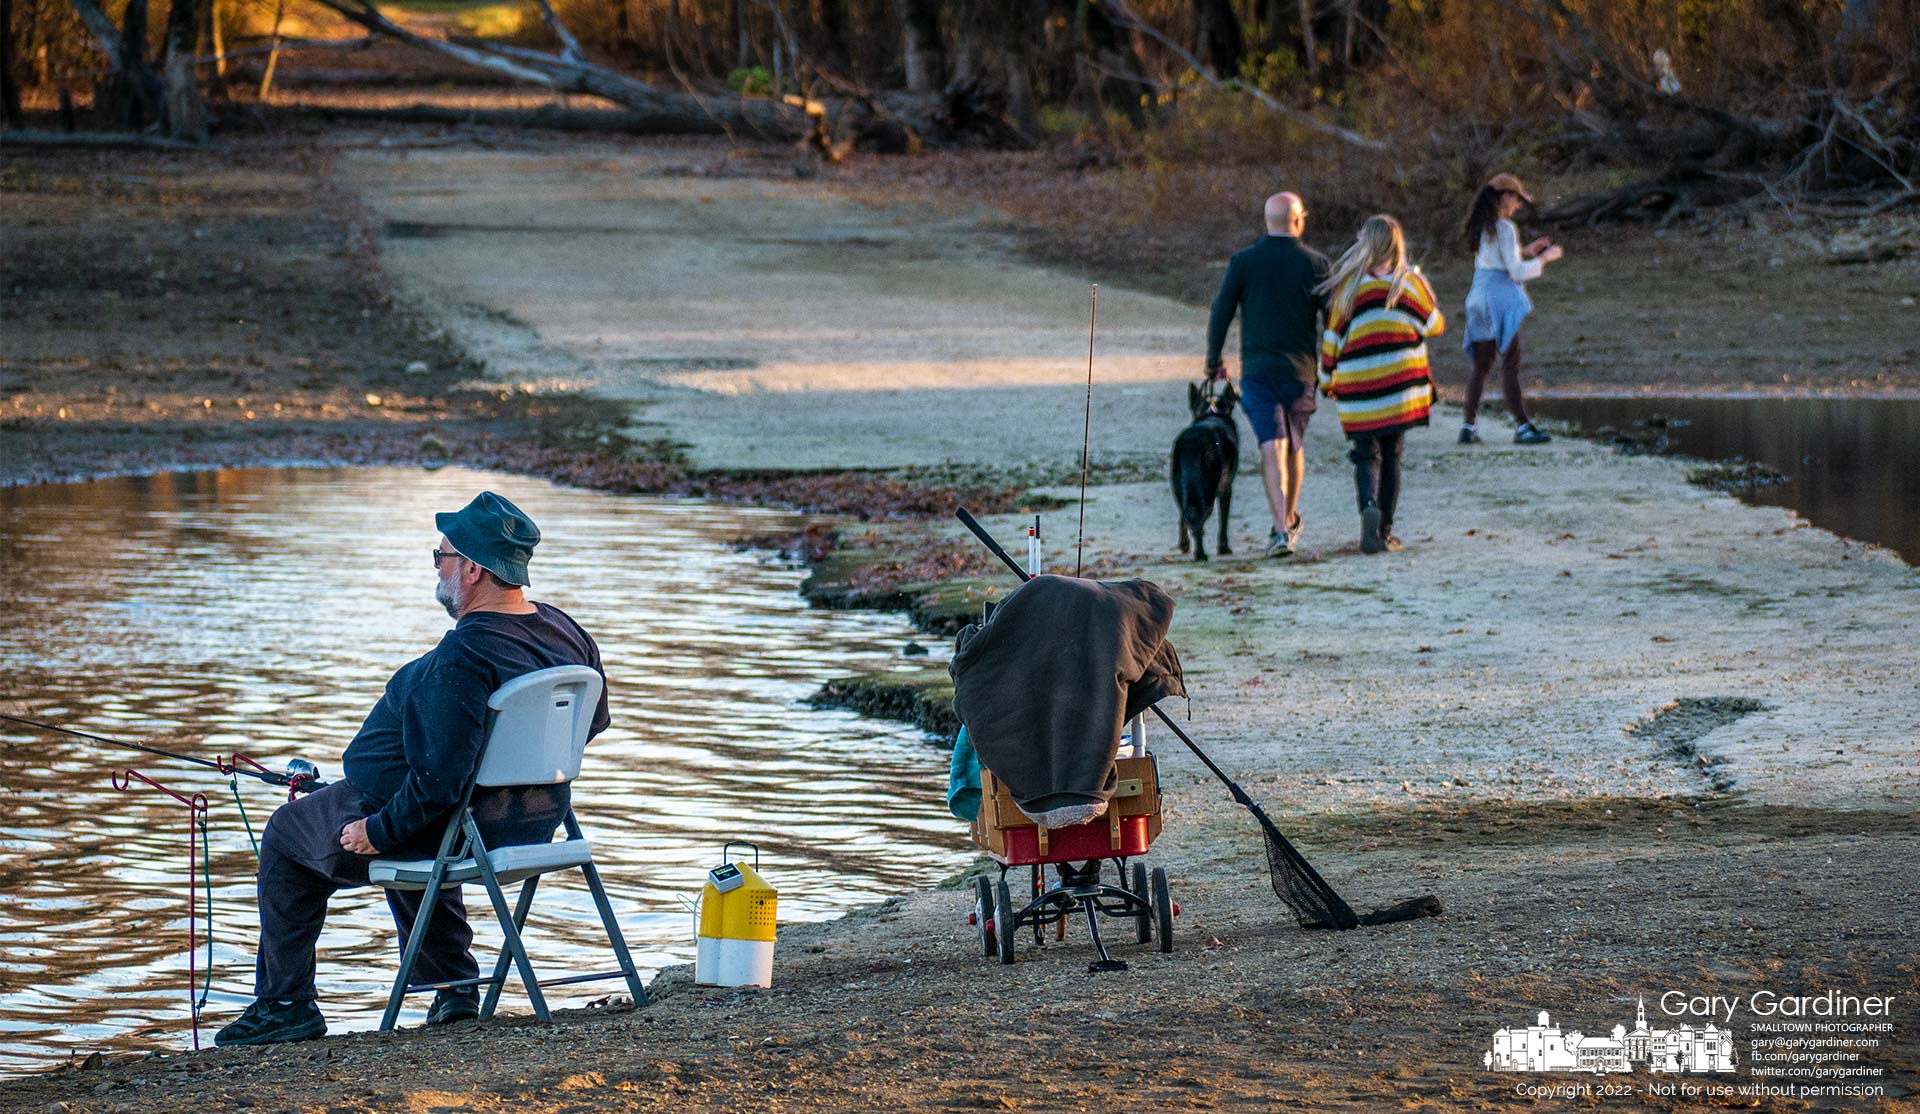 A fisherman watches his lines thrown into Hoover Reservoir as people walk across an exposed section of the old Sunbury Road that is usually covered by water from the reservoir. My Final Photo for October 29,2022.